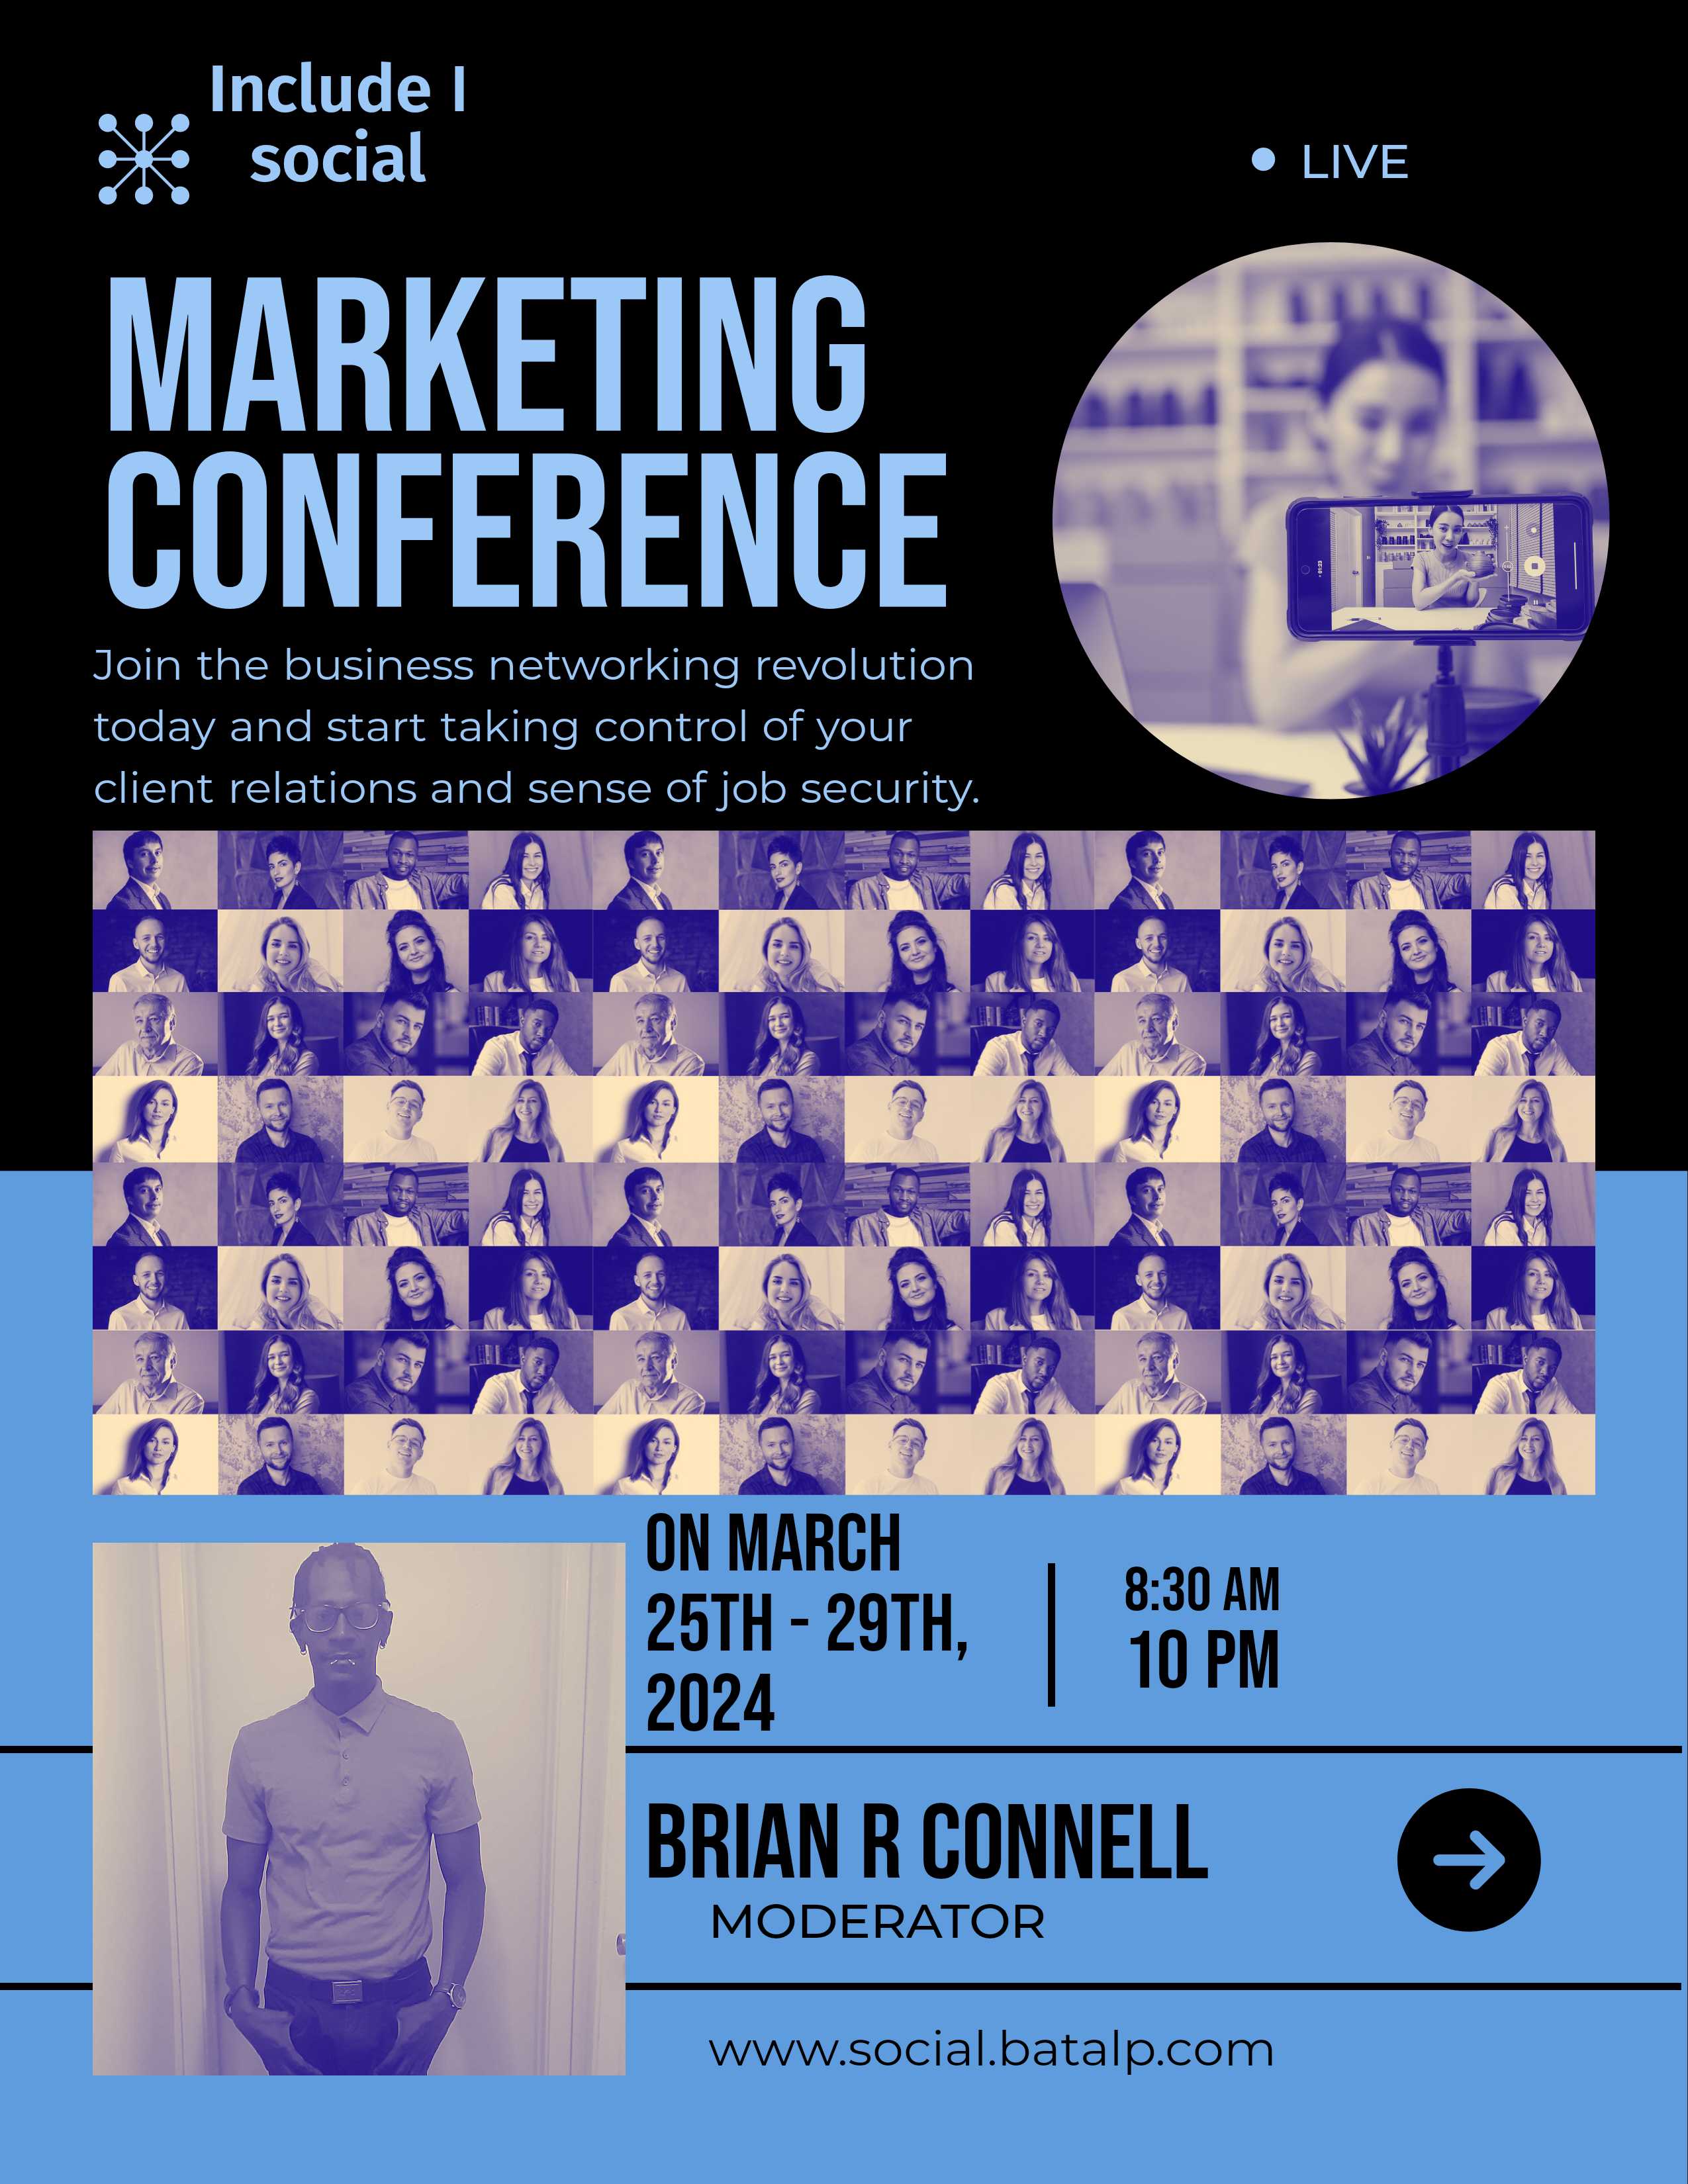 Include i Social Global Marketing Conference – The Blac & Bleu Book Jobs Board